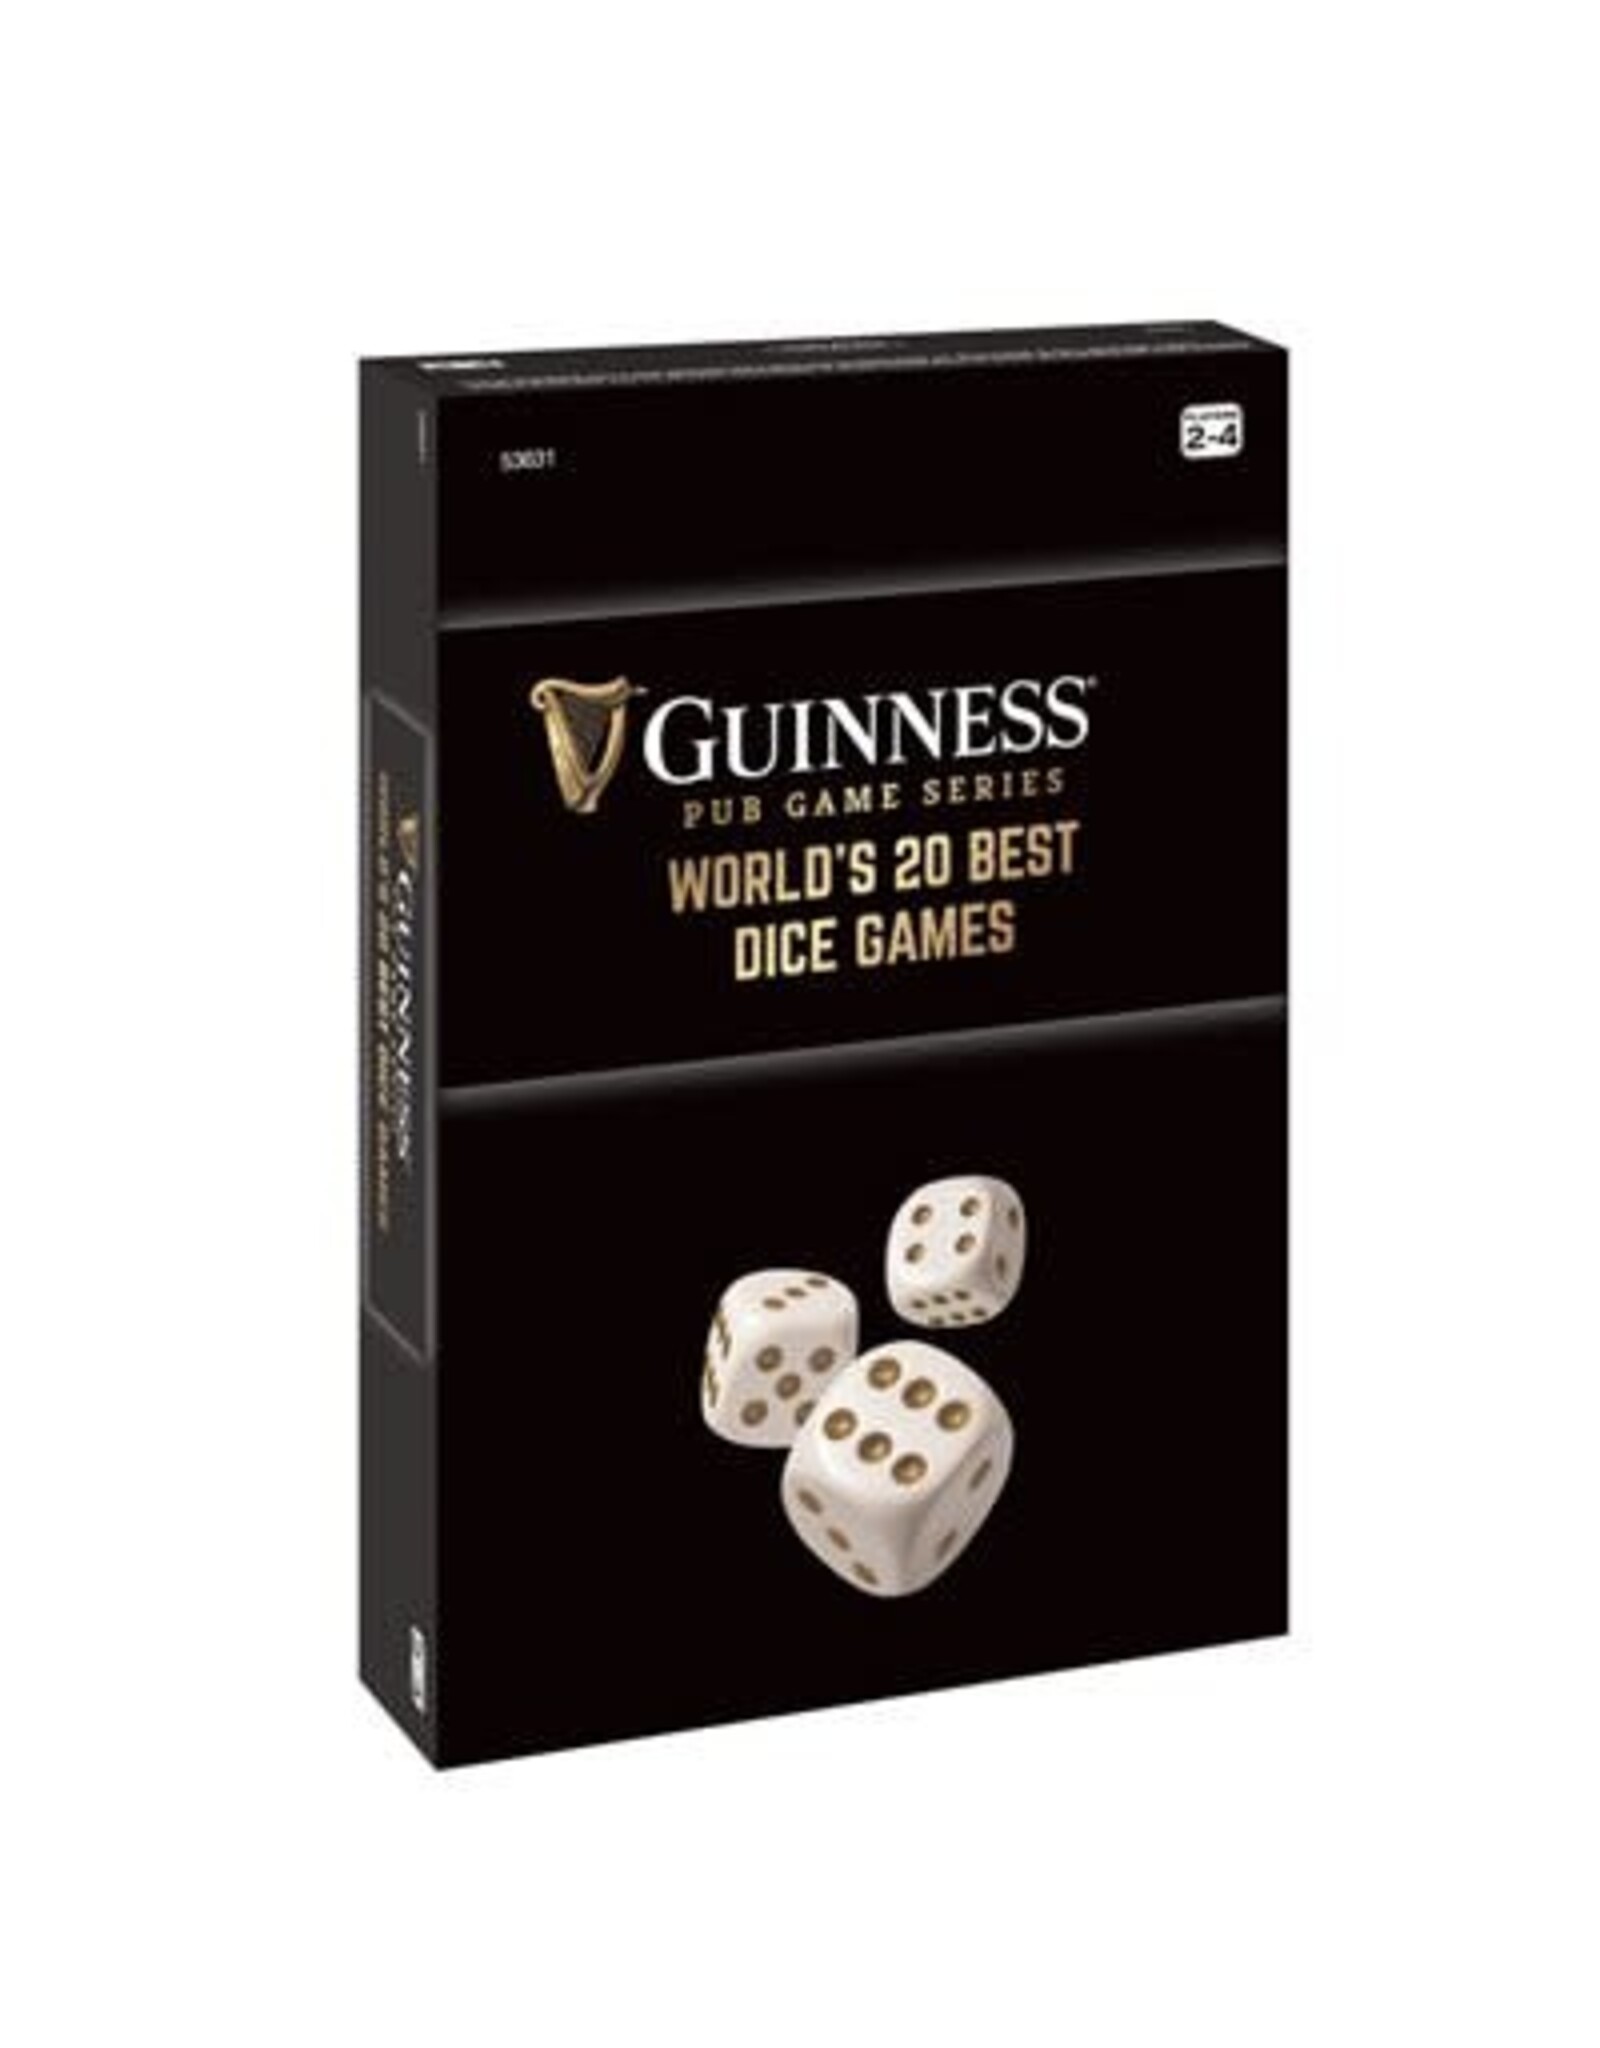 Guinness Games: World's 20 Best Dice Games